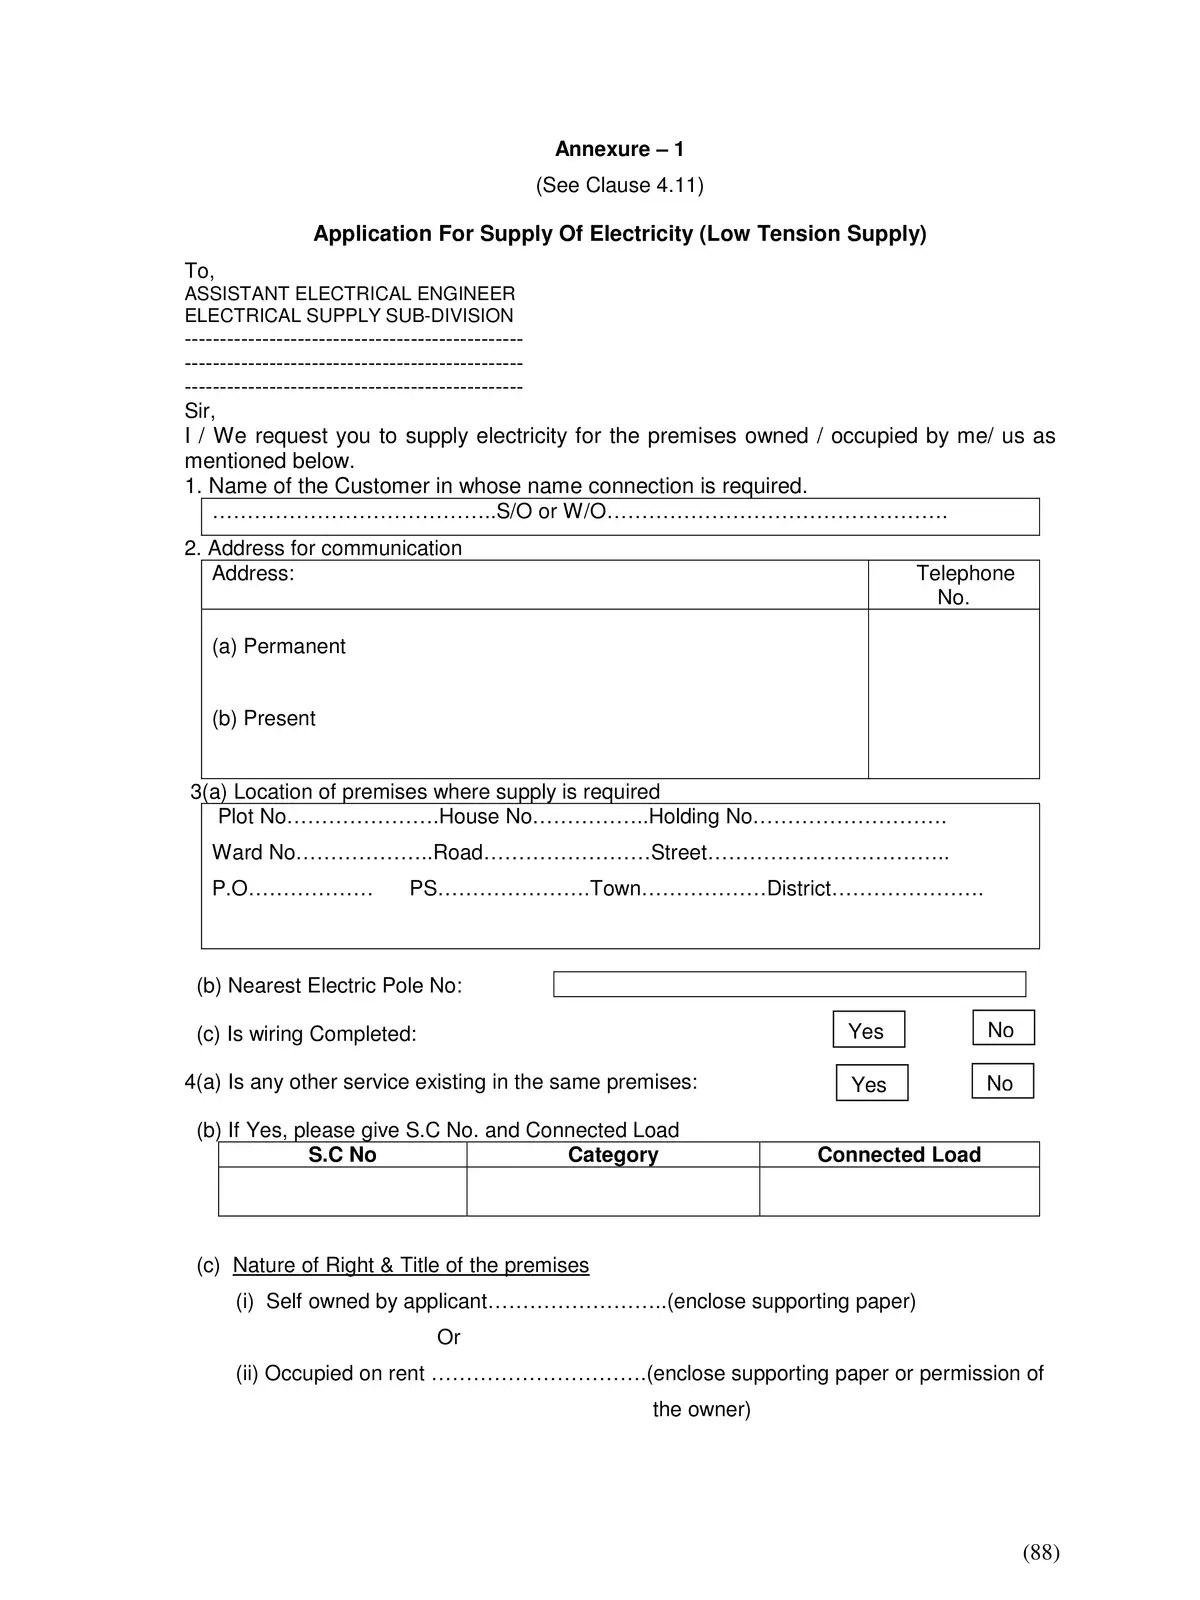 BSPHCL New Electricity Connection Form (Low Tension Supply)